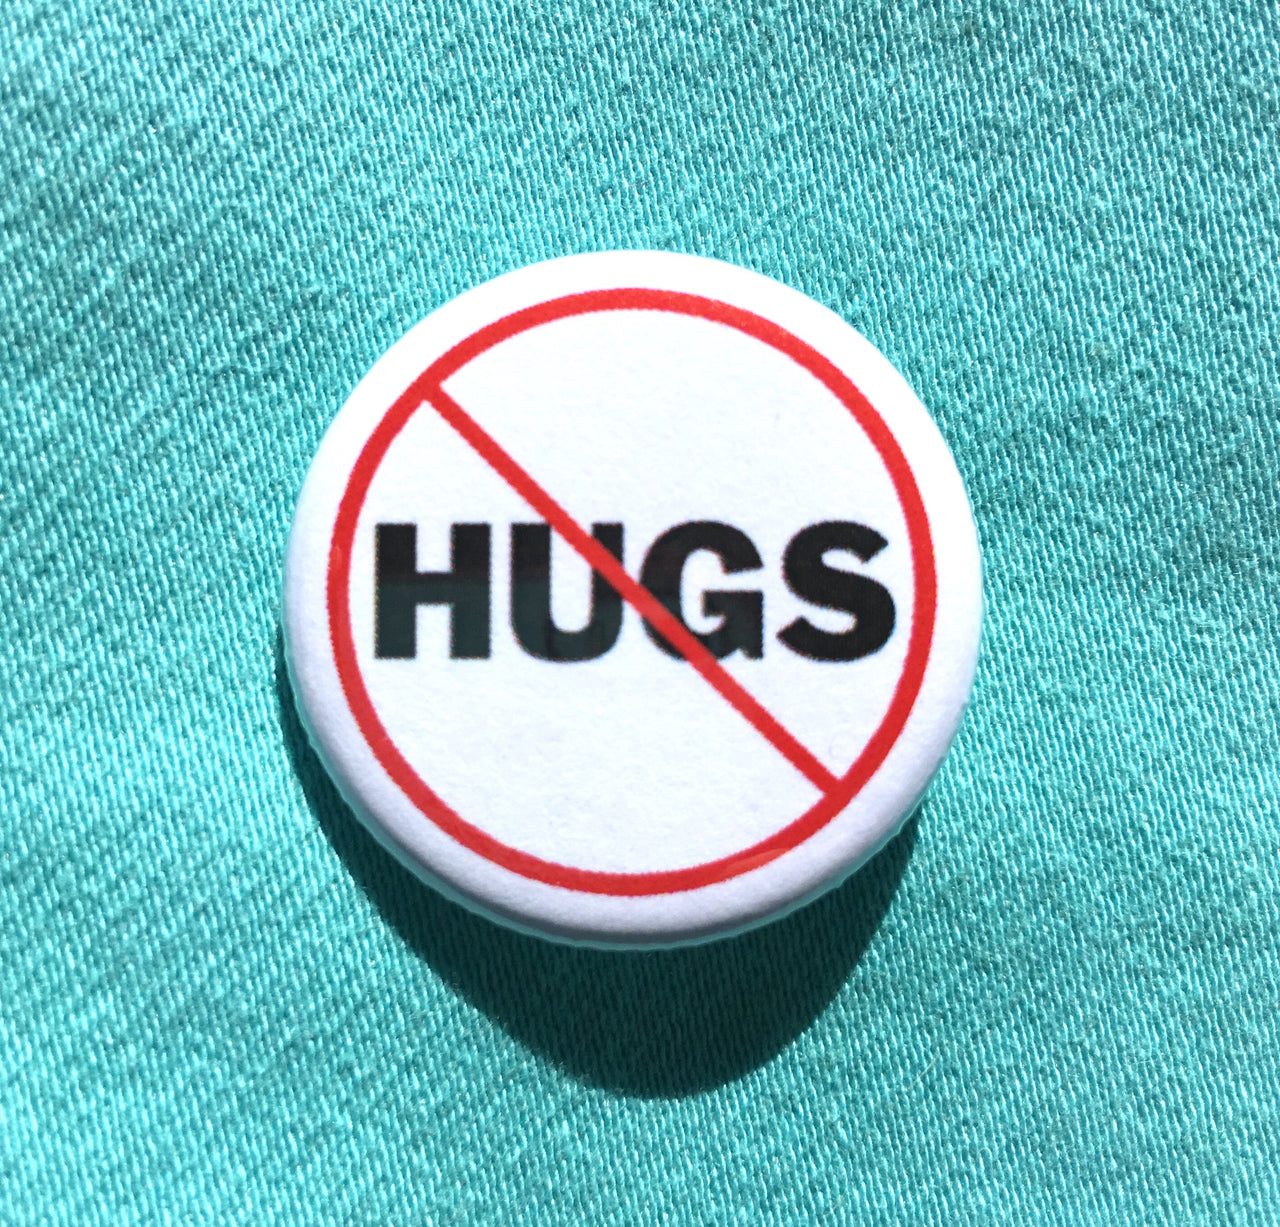 I don’t want hugs - Radical Buttons